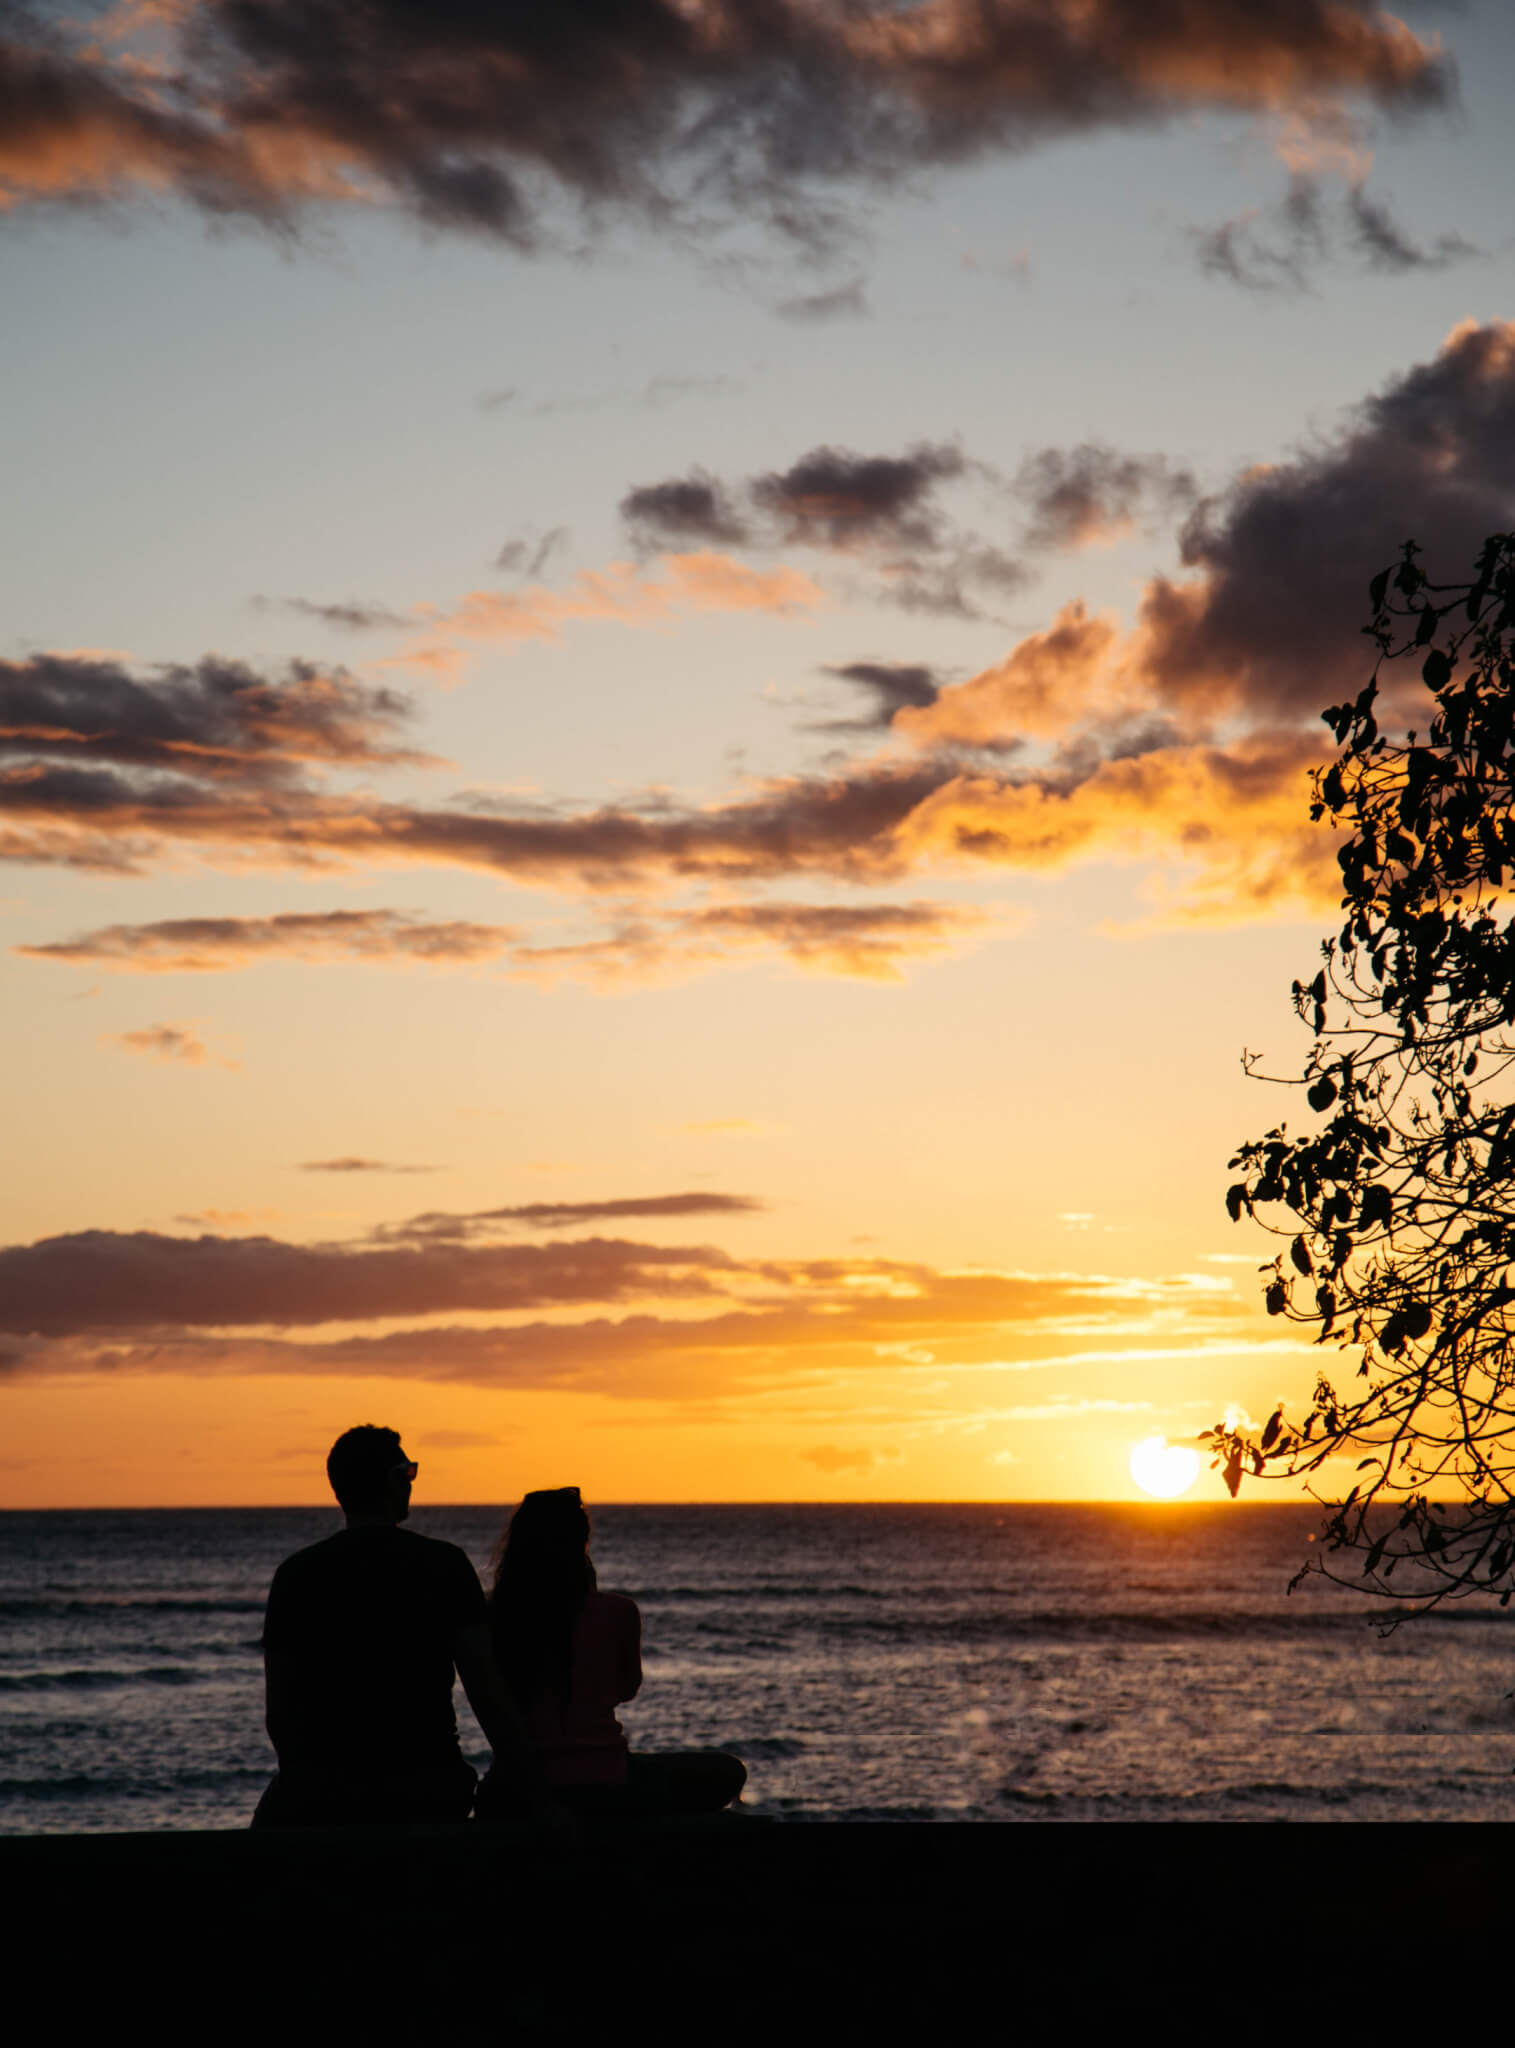 New Yorkers watching the sun set in Maui, Hawaii